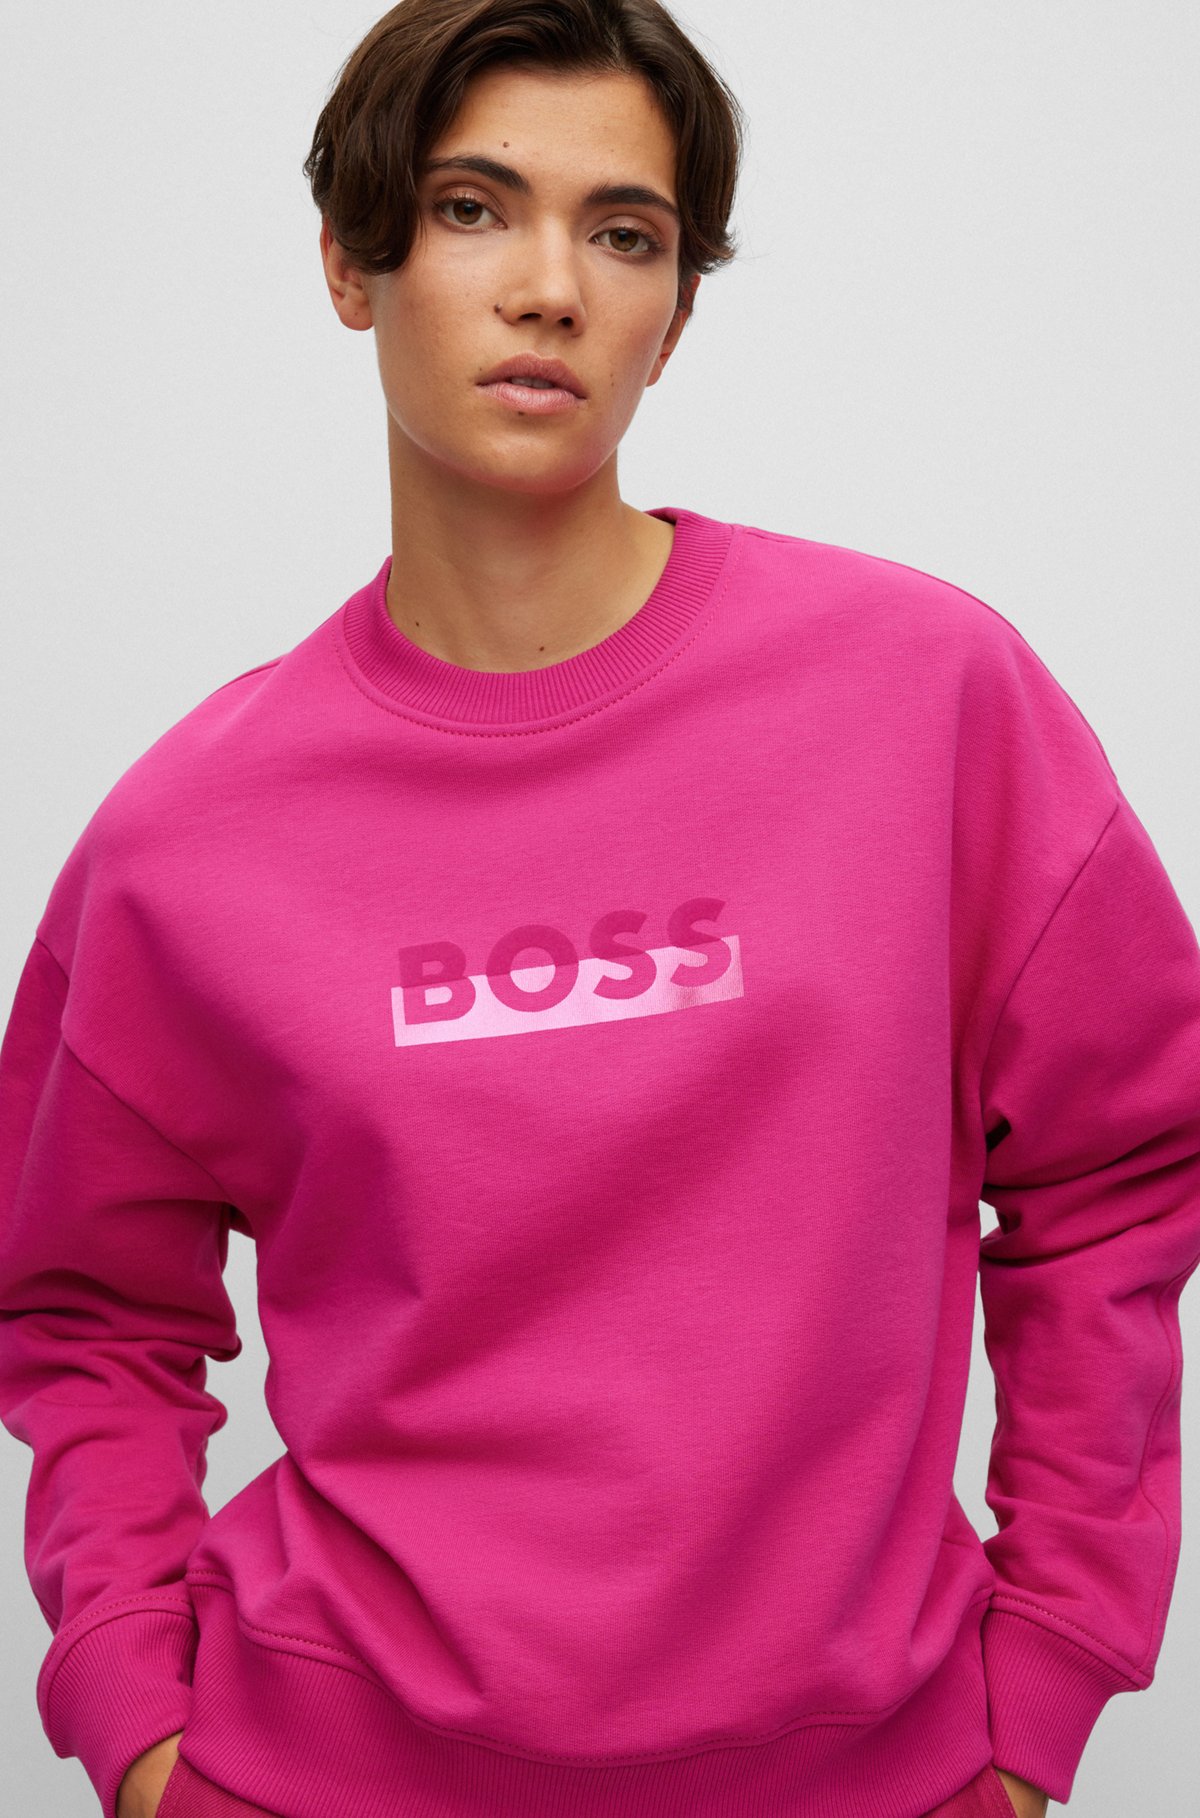 Relaxed-fit cotton-blend sweatshirt with logo detail, Pink